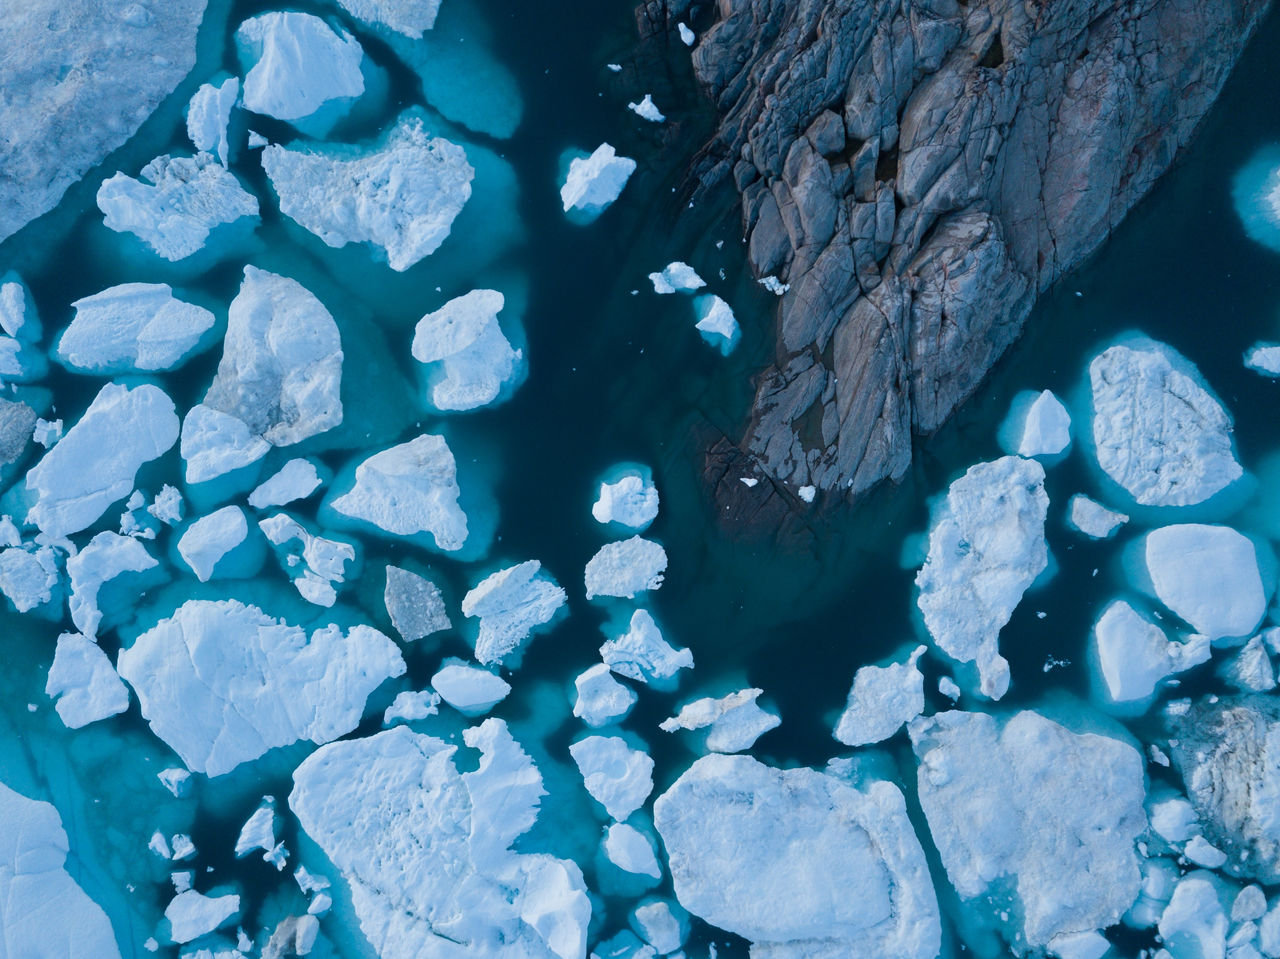 Icebergs drone aerial image top view - Climate Change and Global Warming. Icebergs from melting glacier in icefjord in Ilulissat, Greenland. Arctic nature ice landscape in Unesco World Heritage Site., Icebergs drone aerial image top view - Climate Change and Global